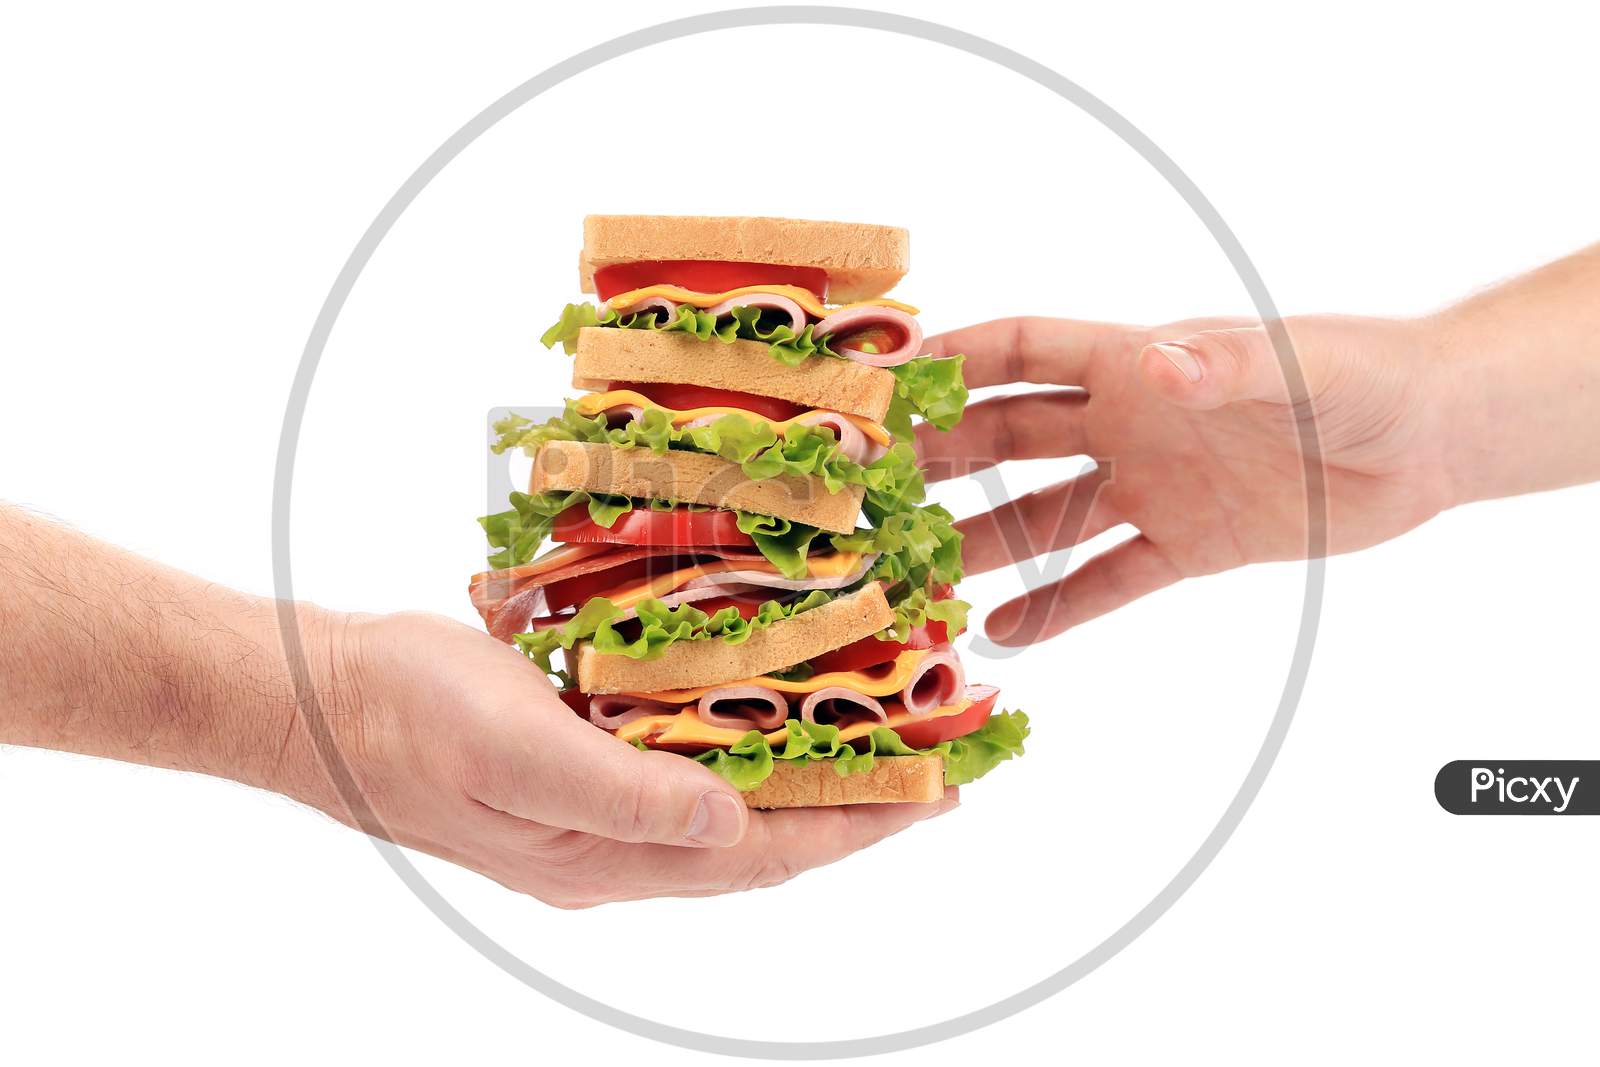 Tasty Sandwich In Hands. Isolated On A White Background.